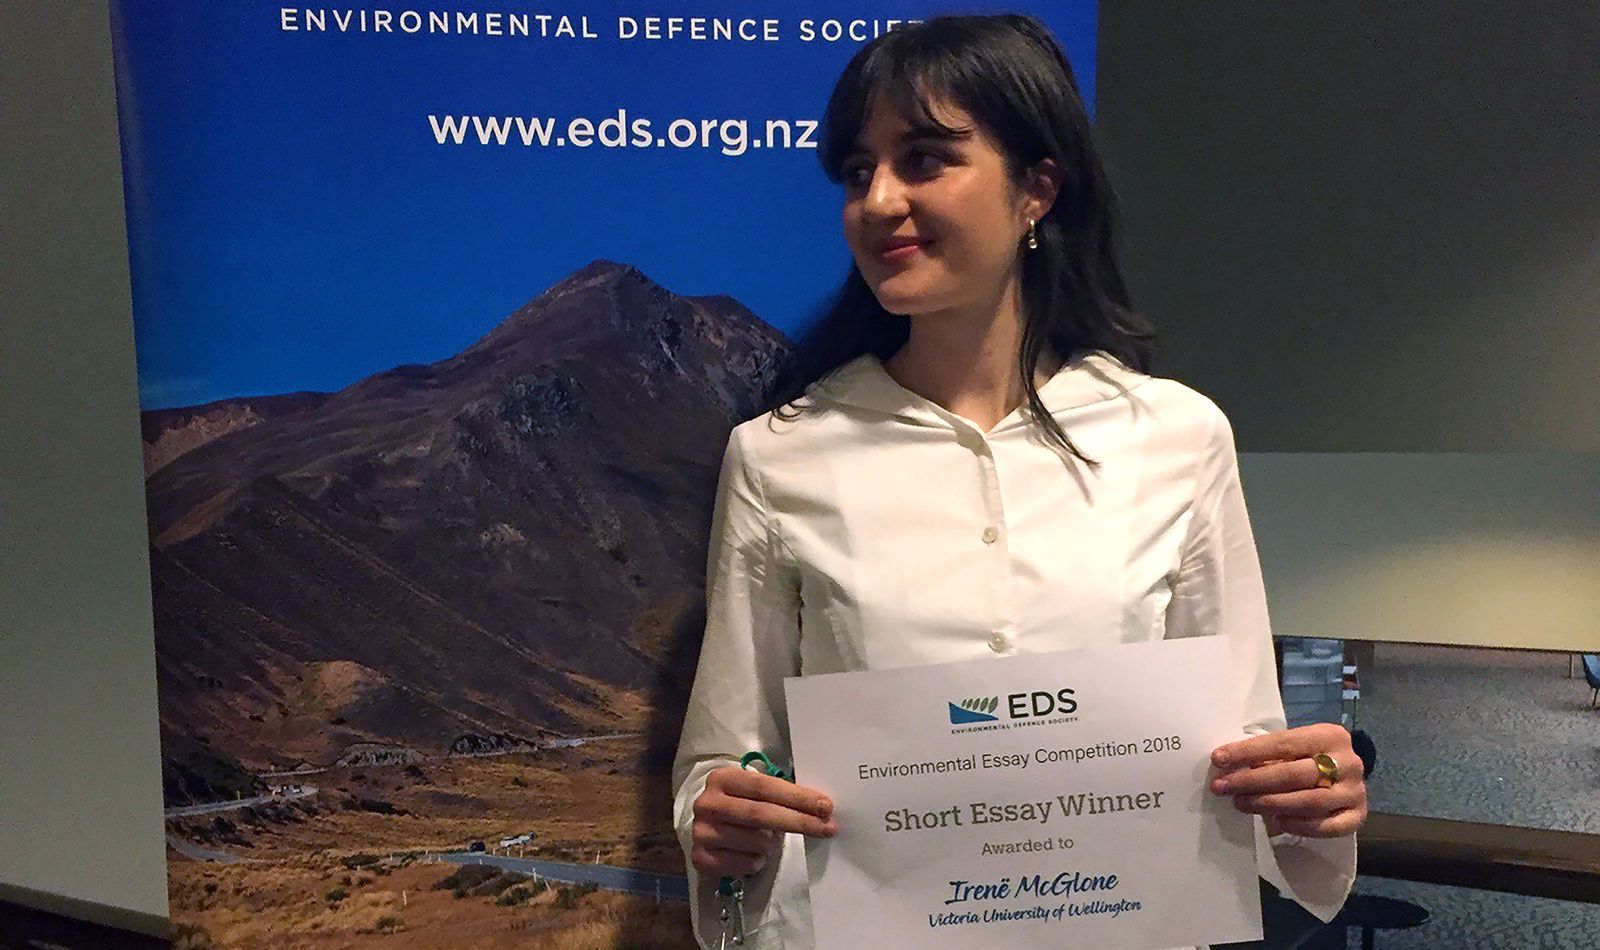 Irene McGlone at the Environmetal Defence Society conference